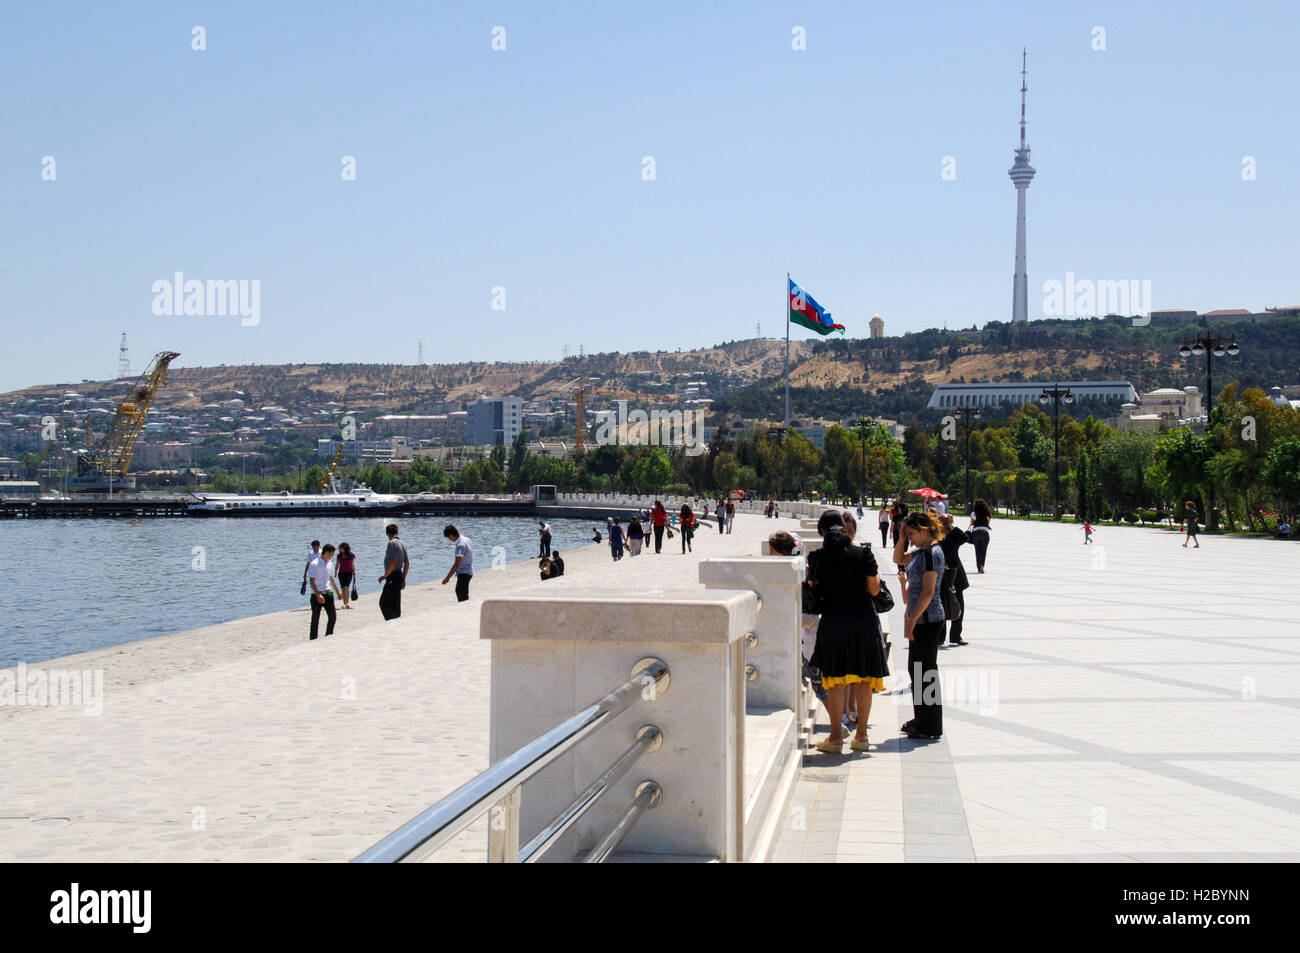 Azerbaijan, Baku. Baku Boulevard is a promenade that runs parallel to Baku's seafront. Baku TV Tower in the background, the tallest building in the country, 310 metres. Stock Photo